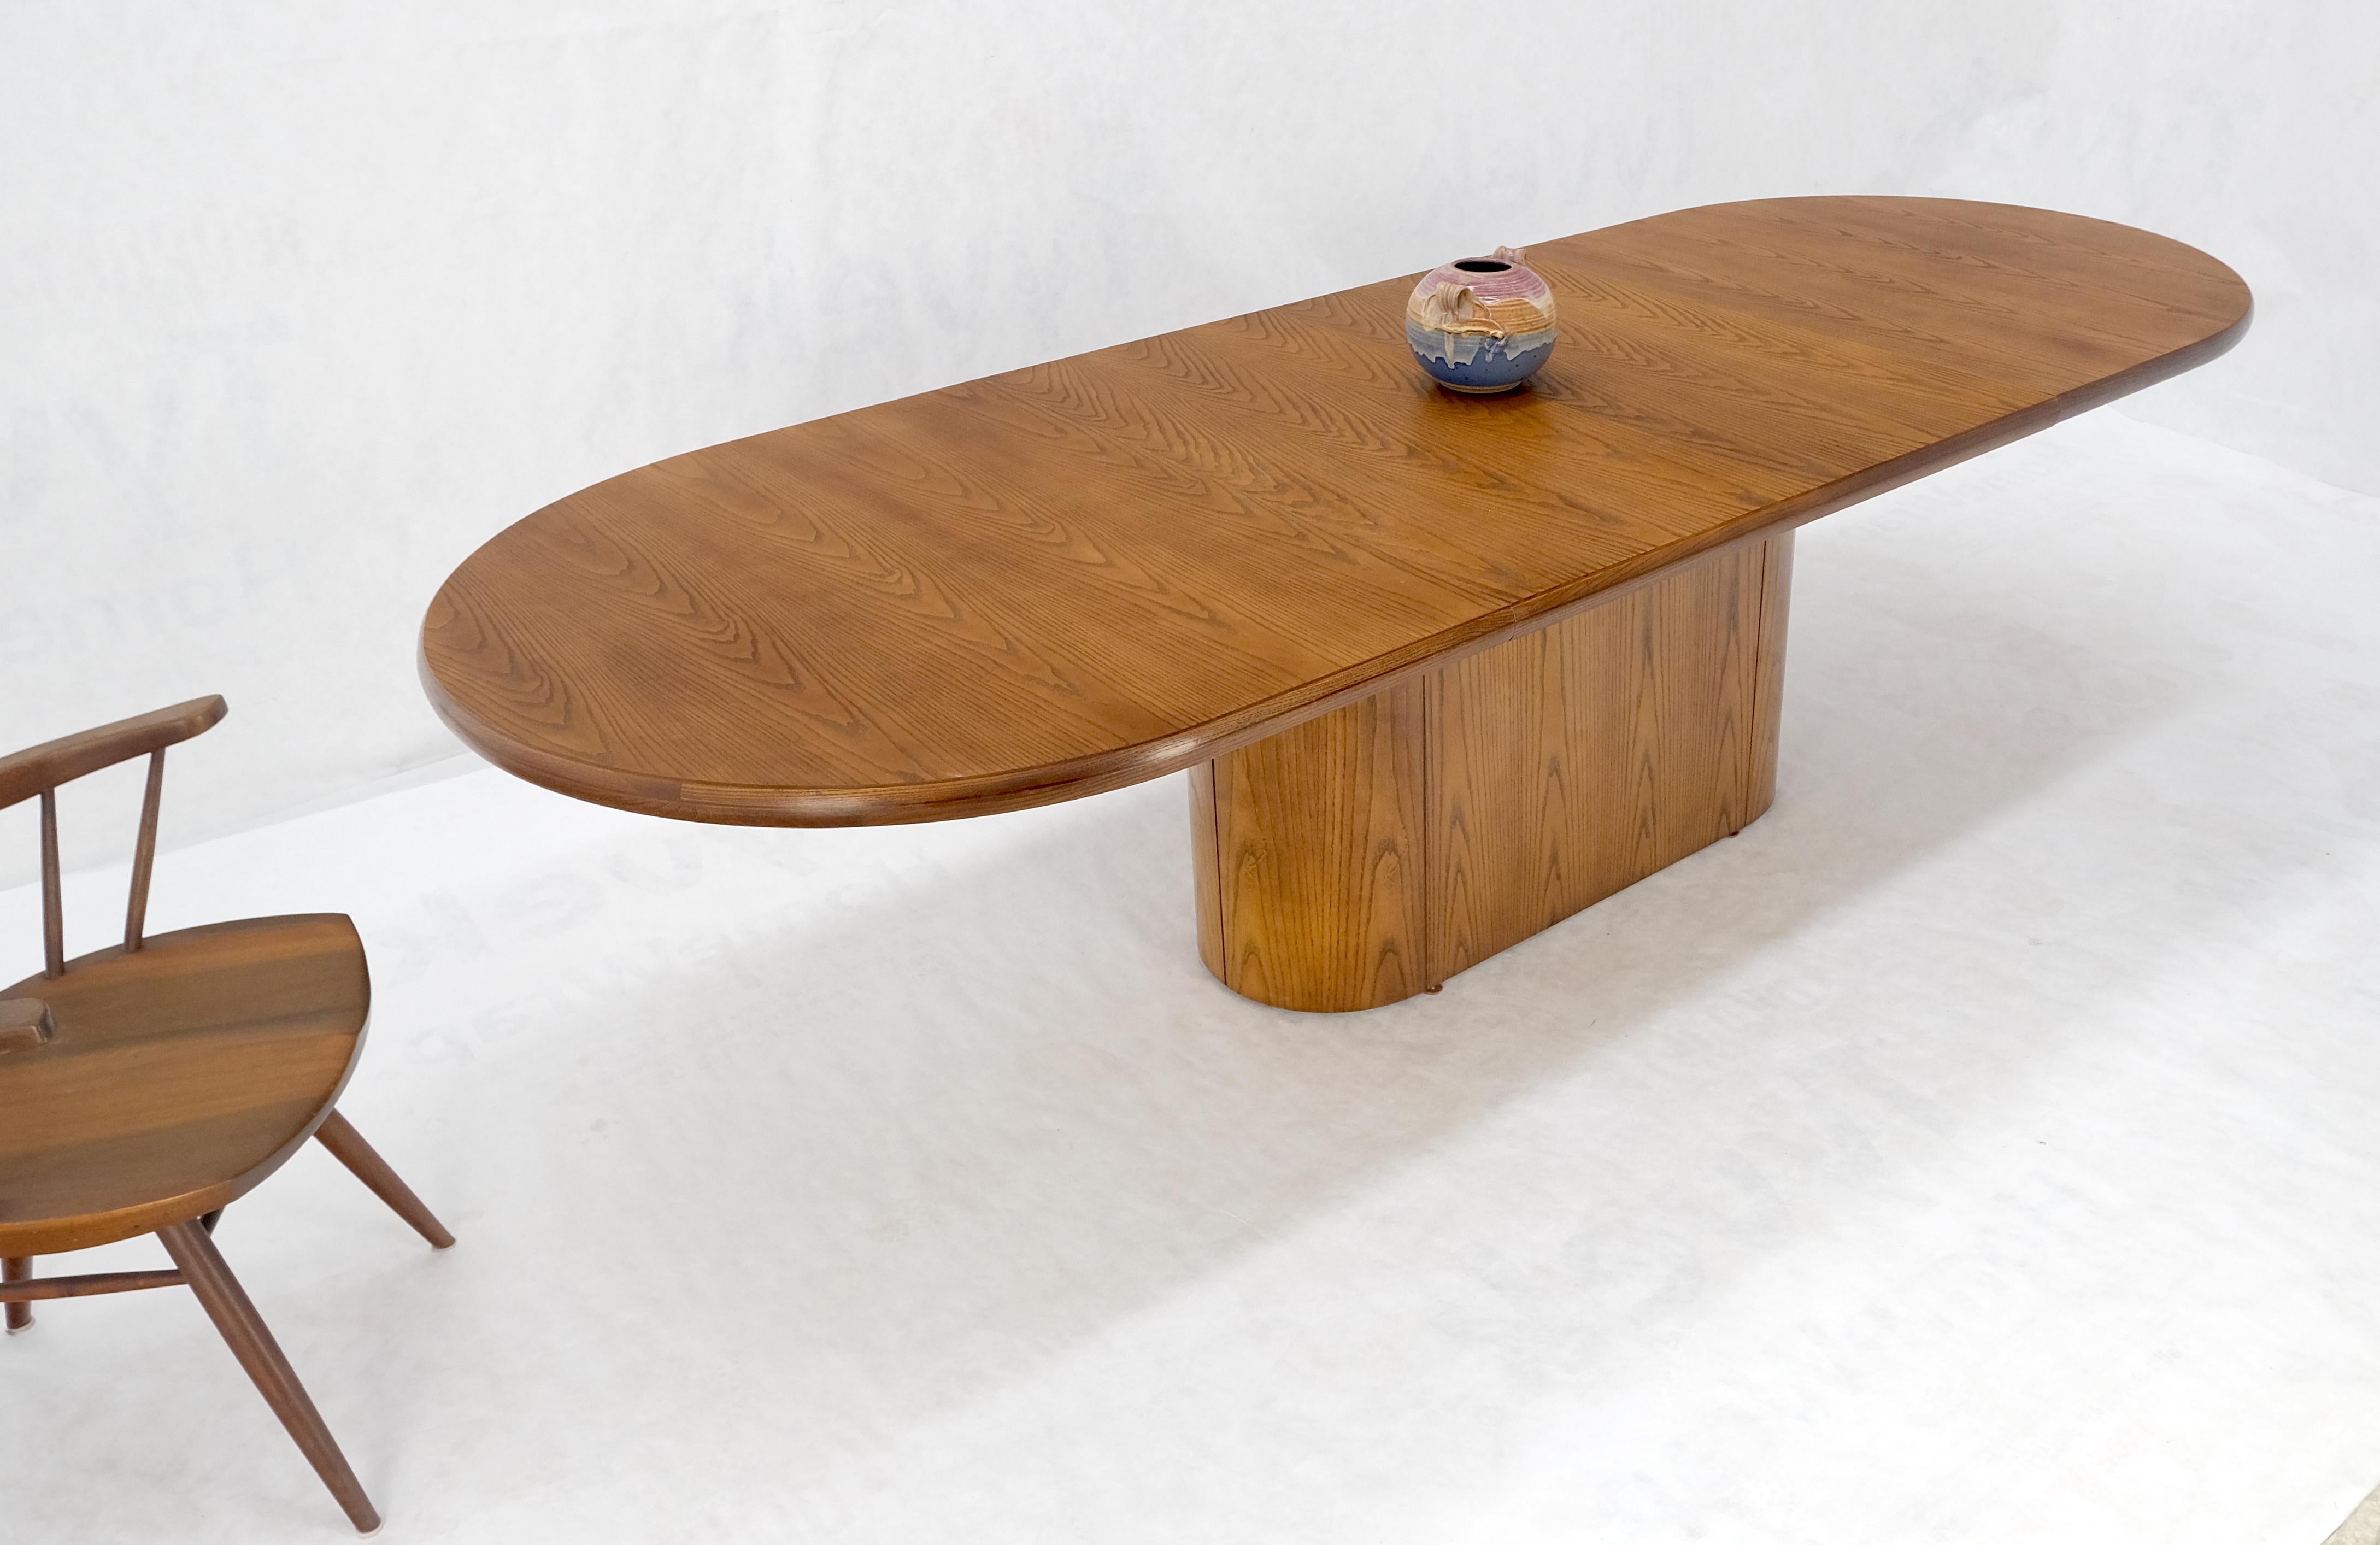 20th Century Single Pedestal Base Oval racetrack Shape Two Leaves Cerused Oak Dining Table  For Sale